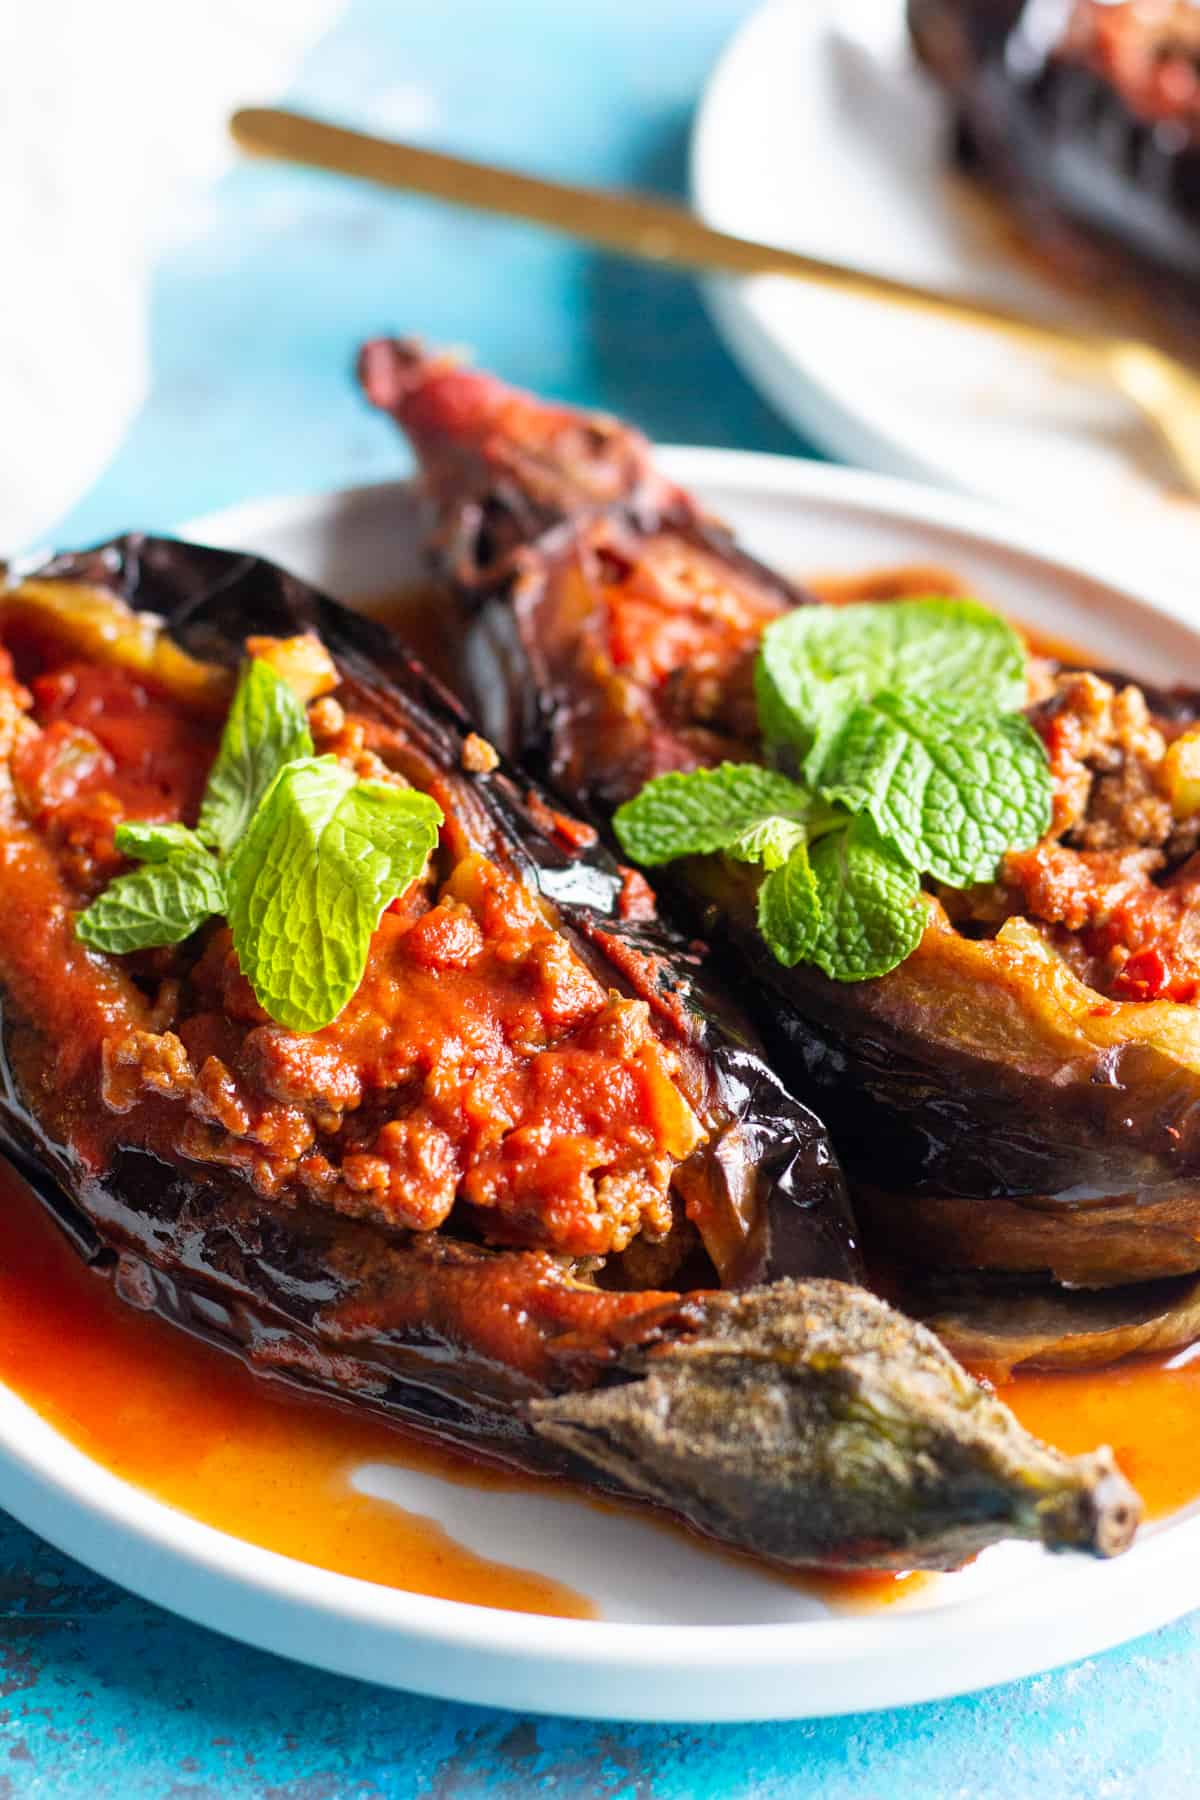 Karniyarik is a classic Turkish stuffed eggplant recipe. Delicious eggplants are stuffed with a tasty ground beef, pepper and tomatoes filling and are baked to perfection. 